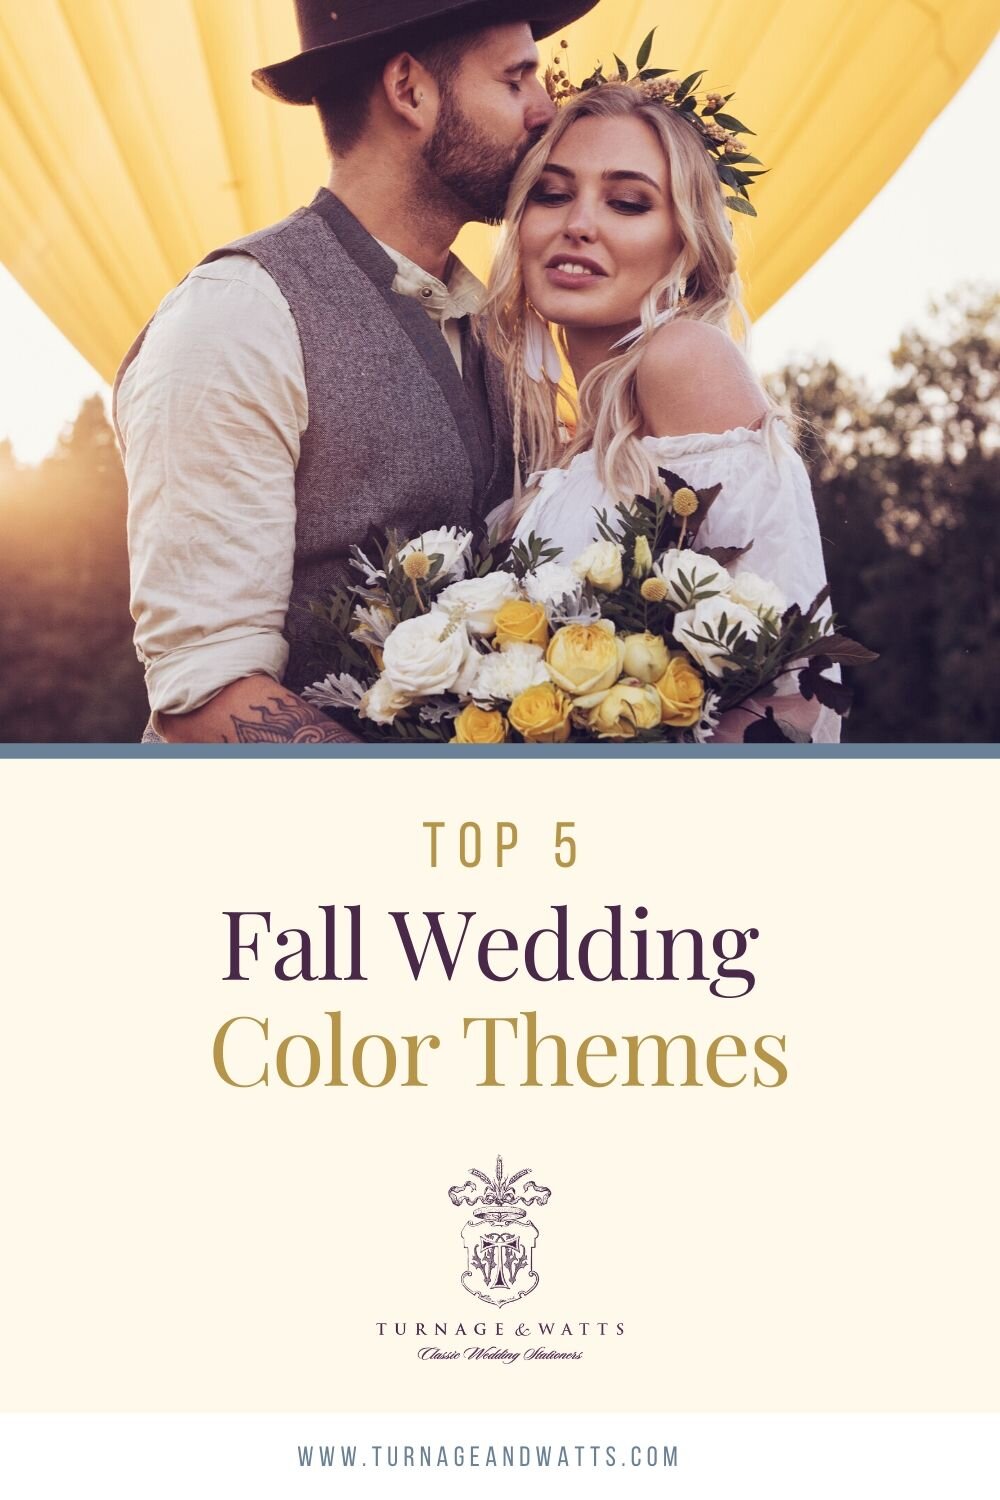 Young engaged couple with yellow fall flowers in front of a yellow balloon.